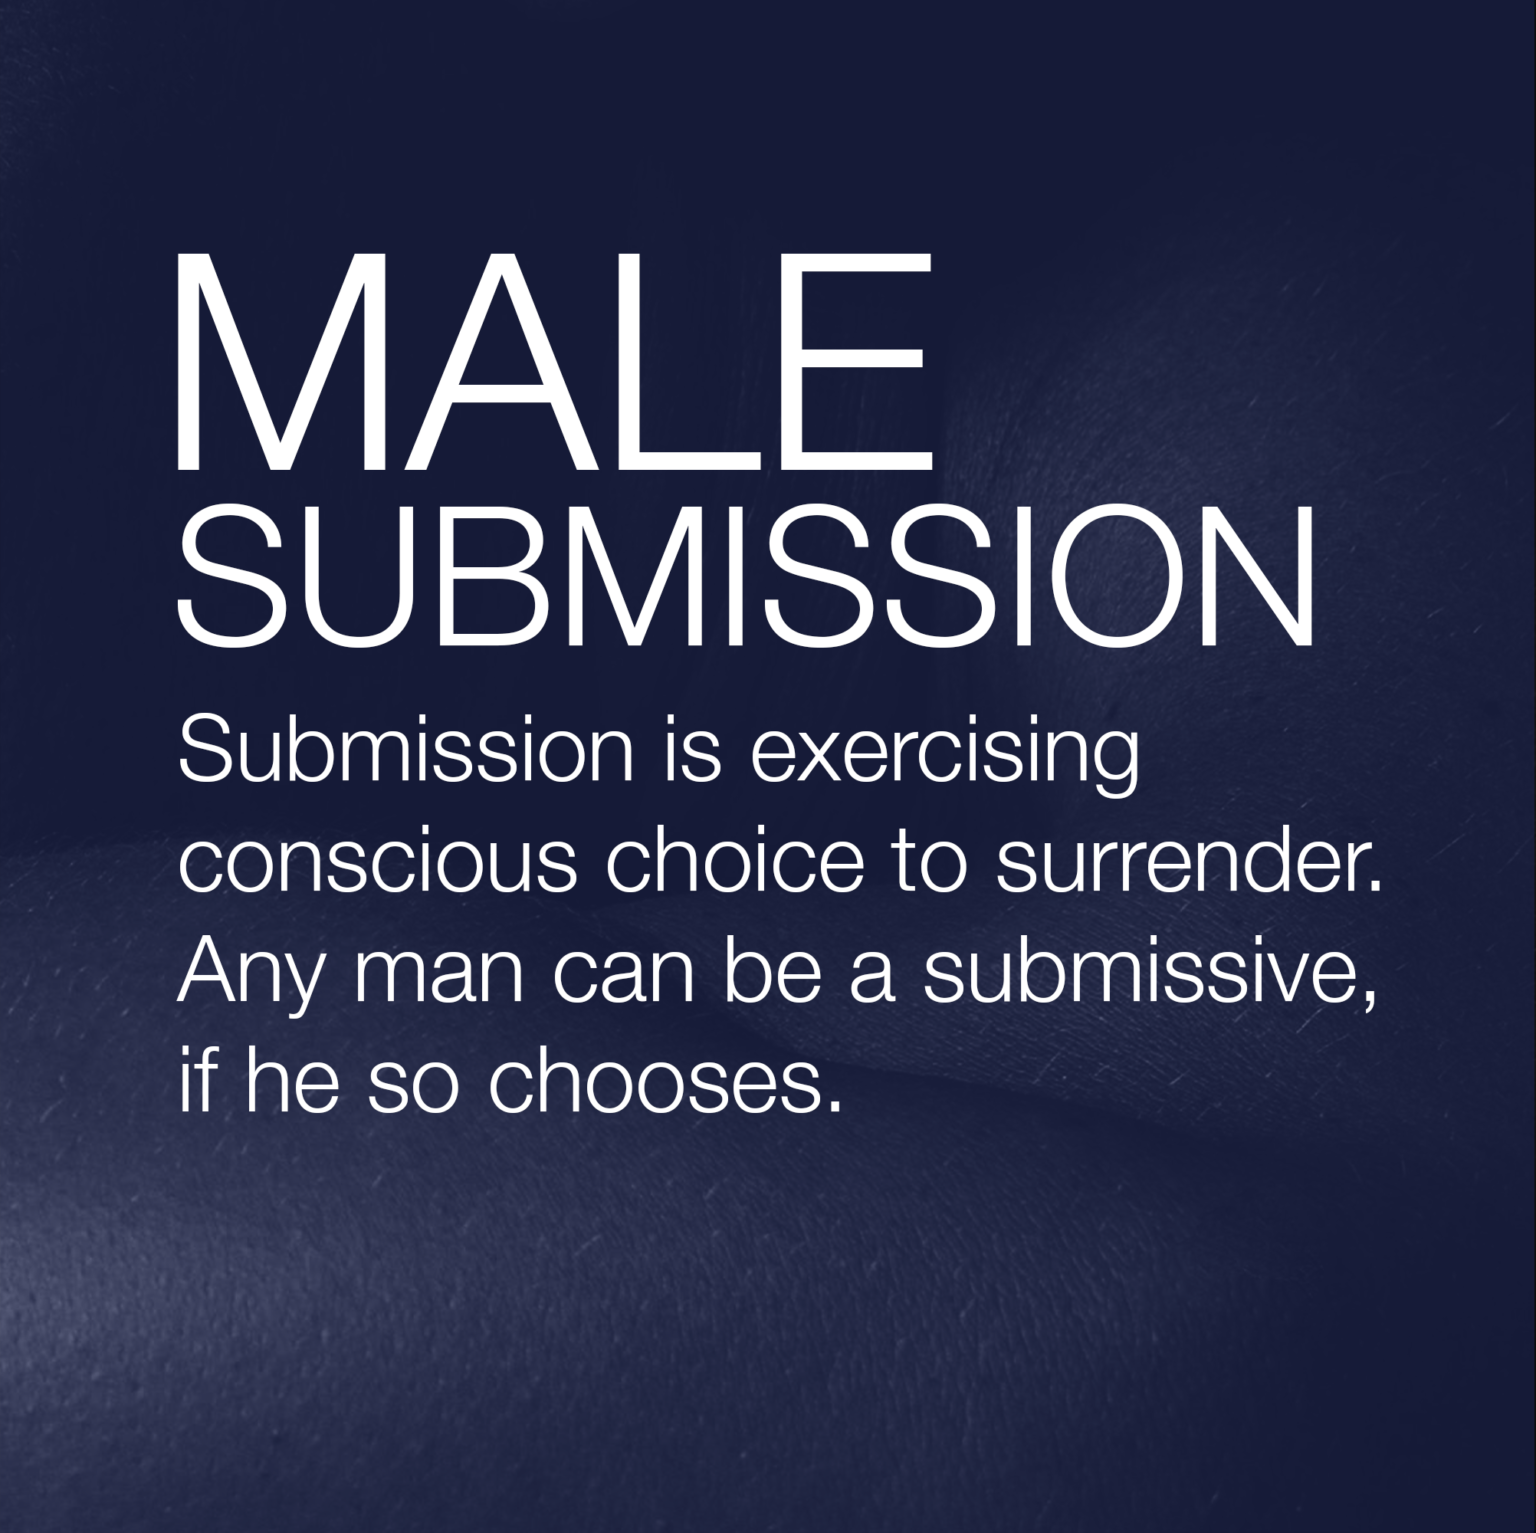 Submission is exercising conscious choice to surrender. And man can be a submissive, if he so chooses.